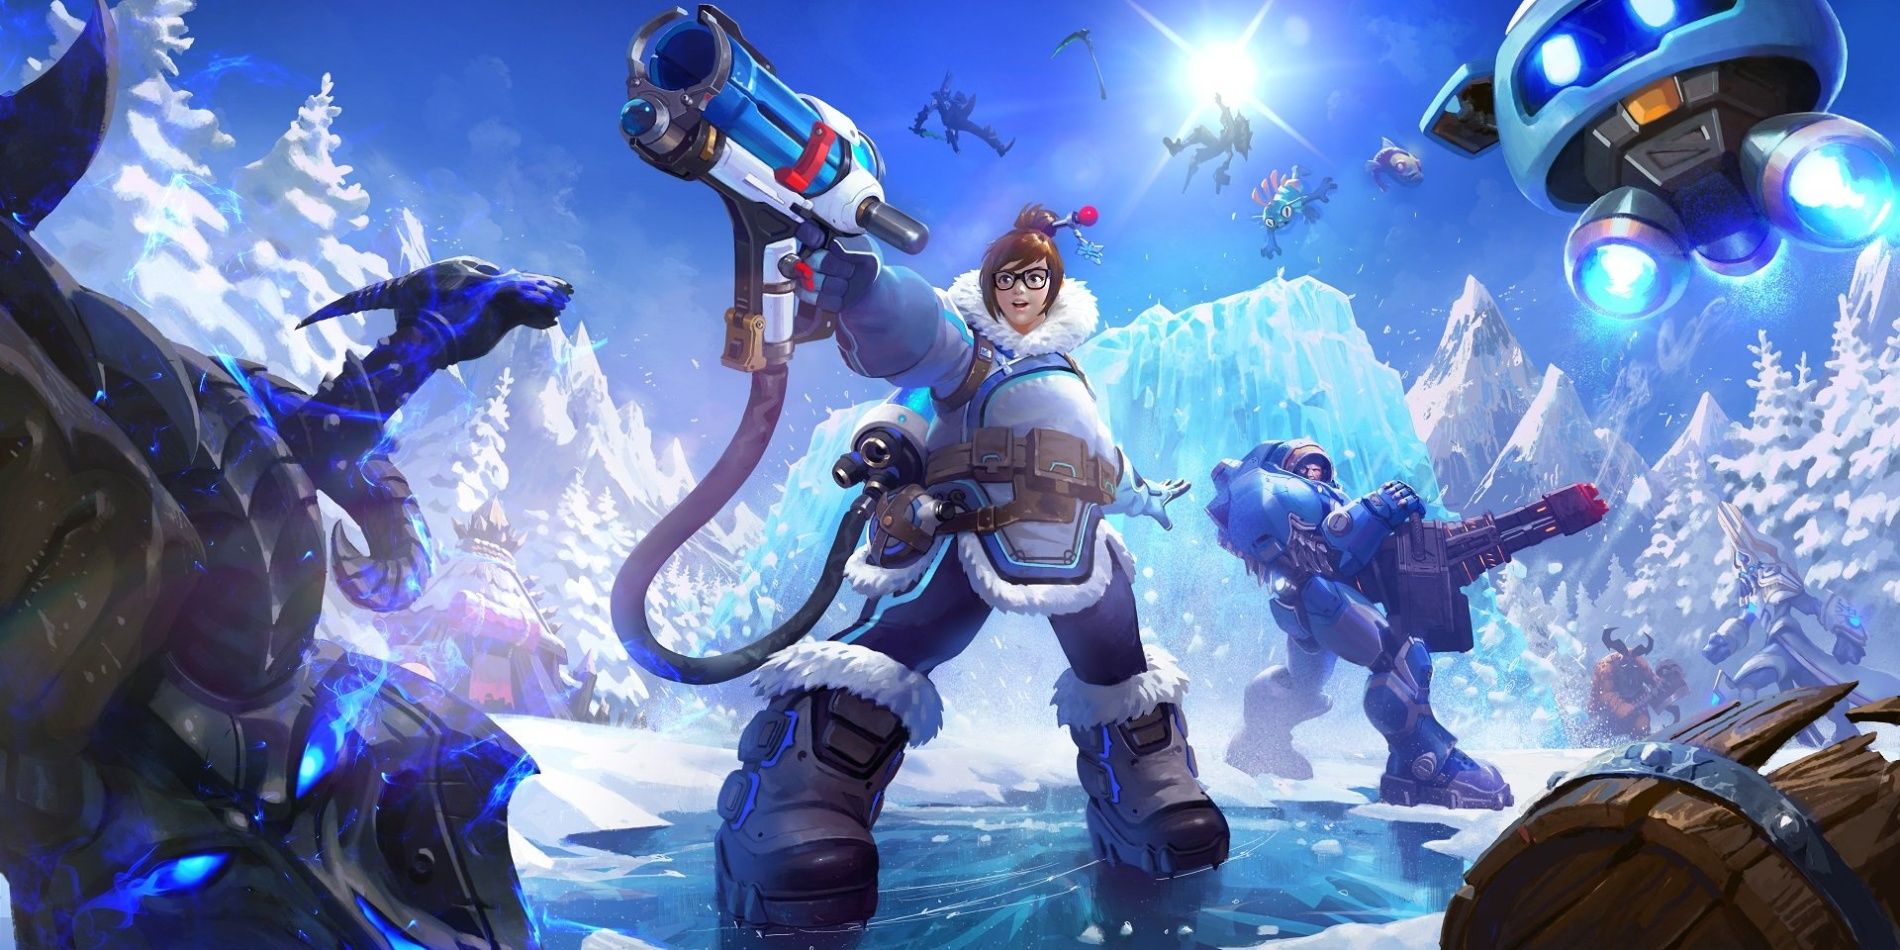  Official art of Mei from Overwatch in Heroes of the Storm.